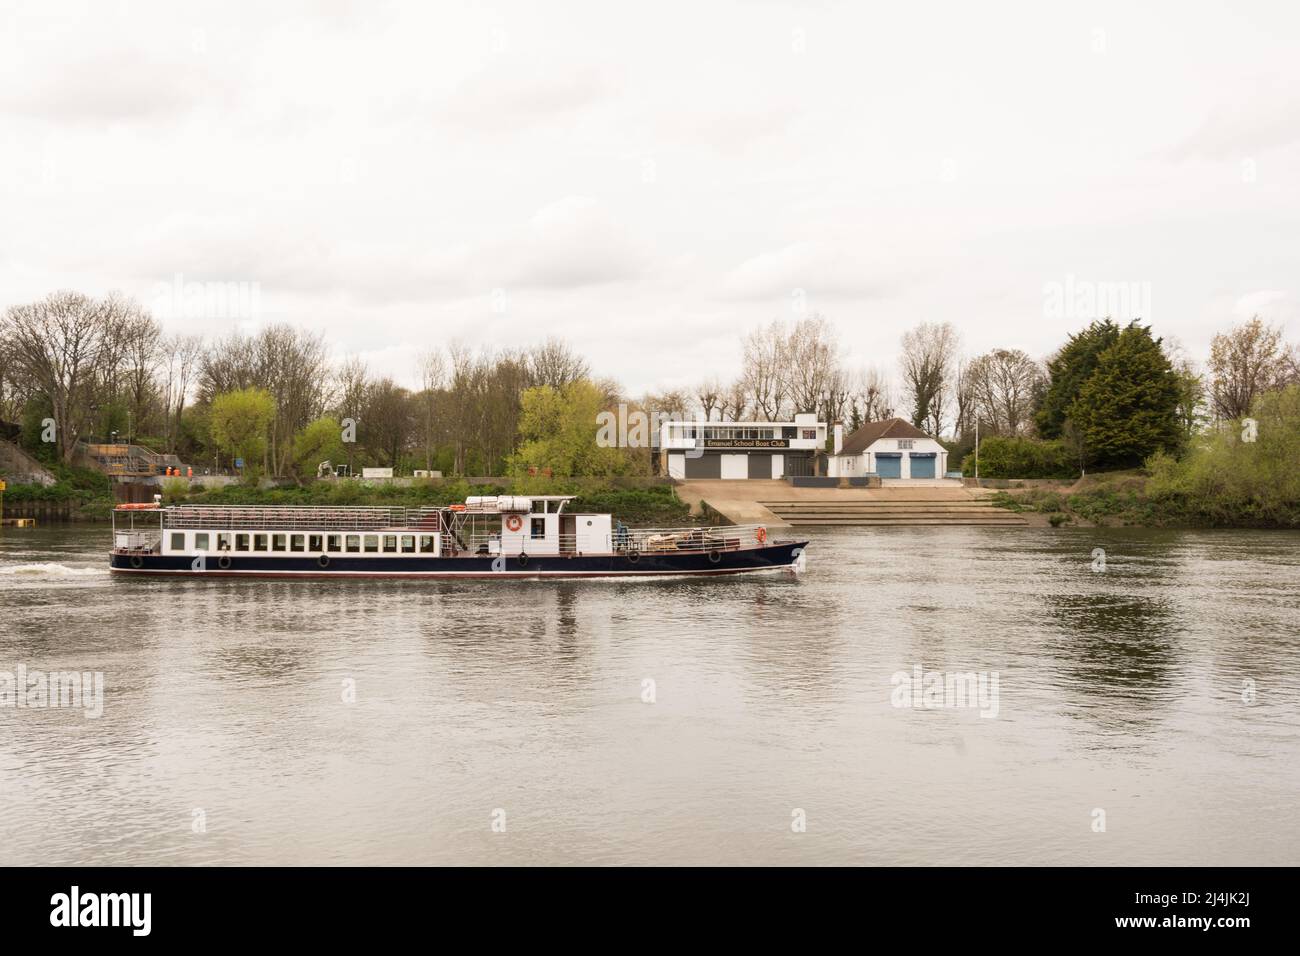 An empty pleasure cruiser passing in front of Emanuel School Boat Club on a placid River Thames in Barnes, southwest London, England, U.K. Stock Photo